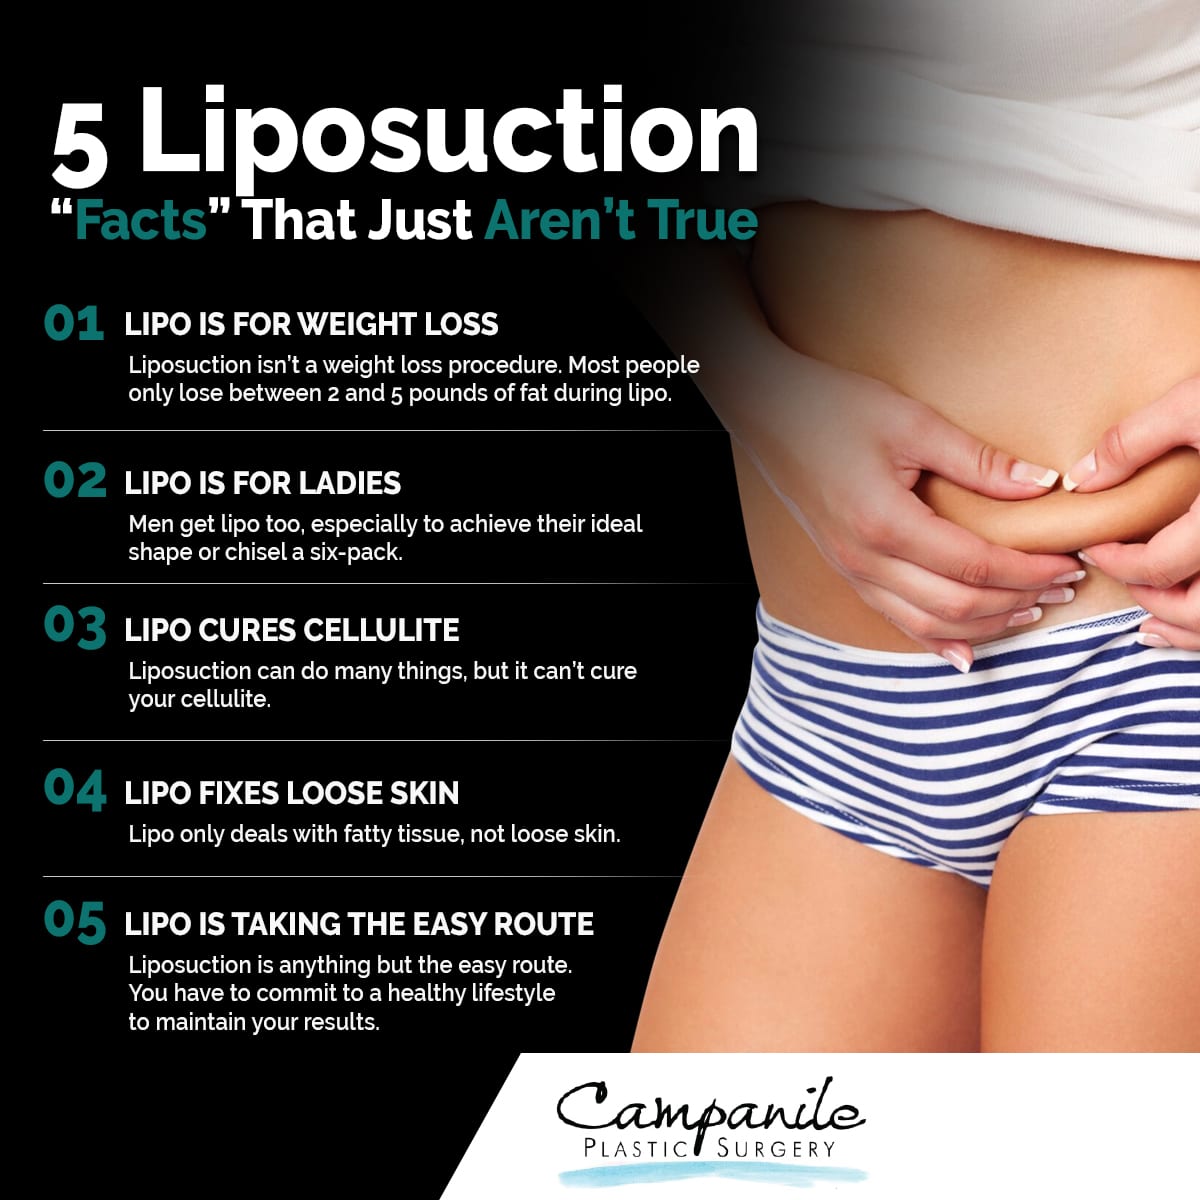 November infographic about liposuction